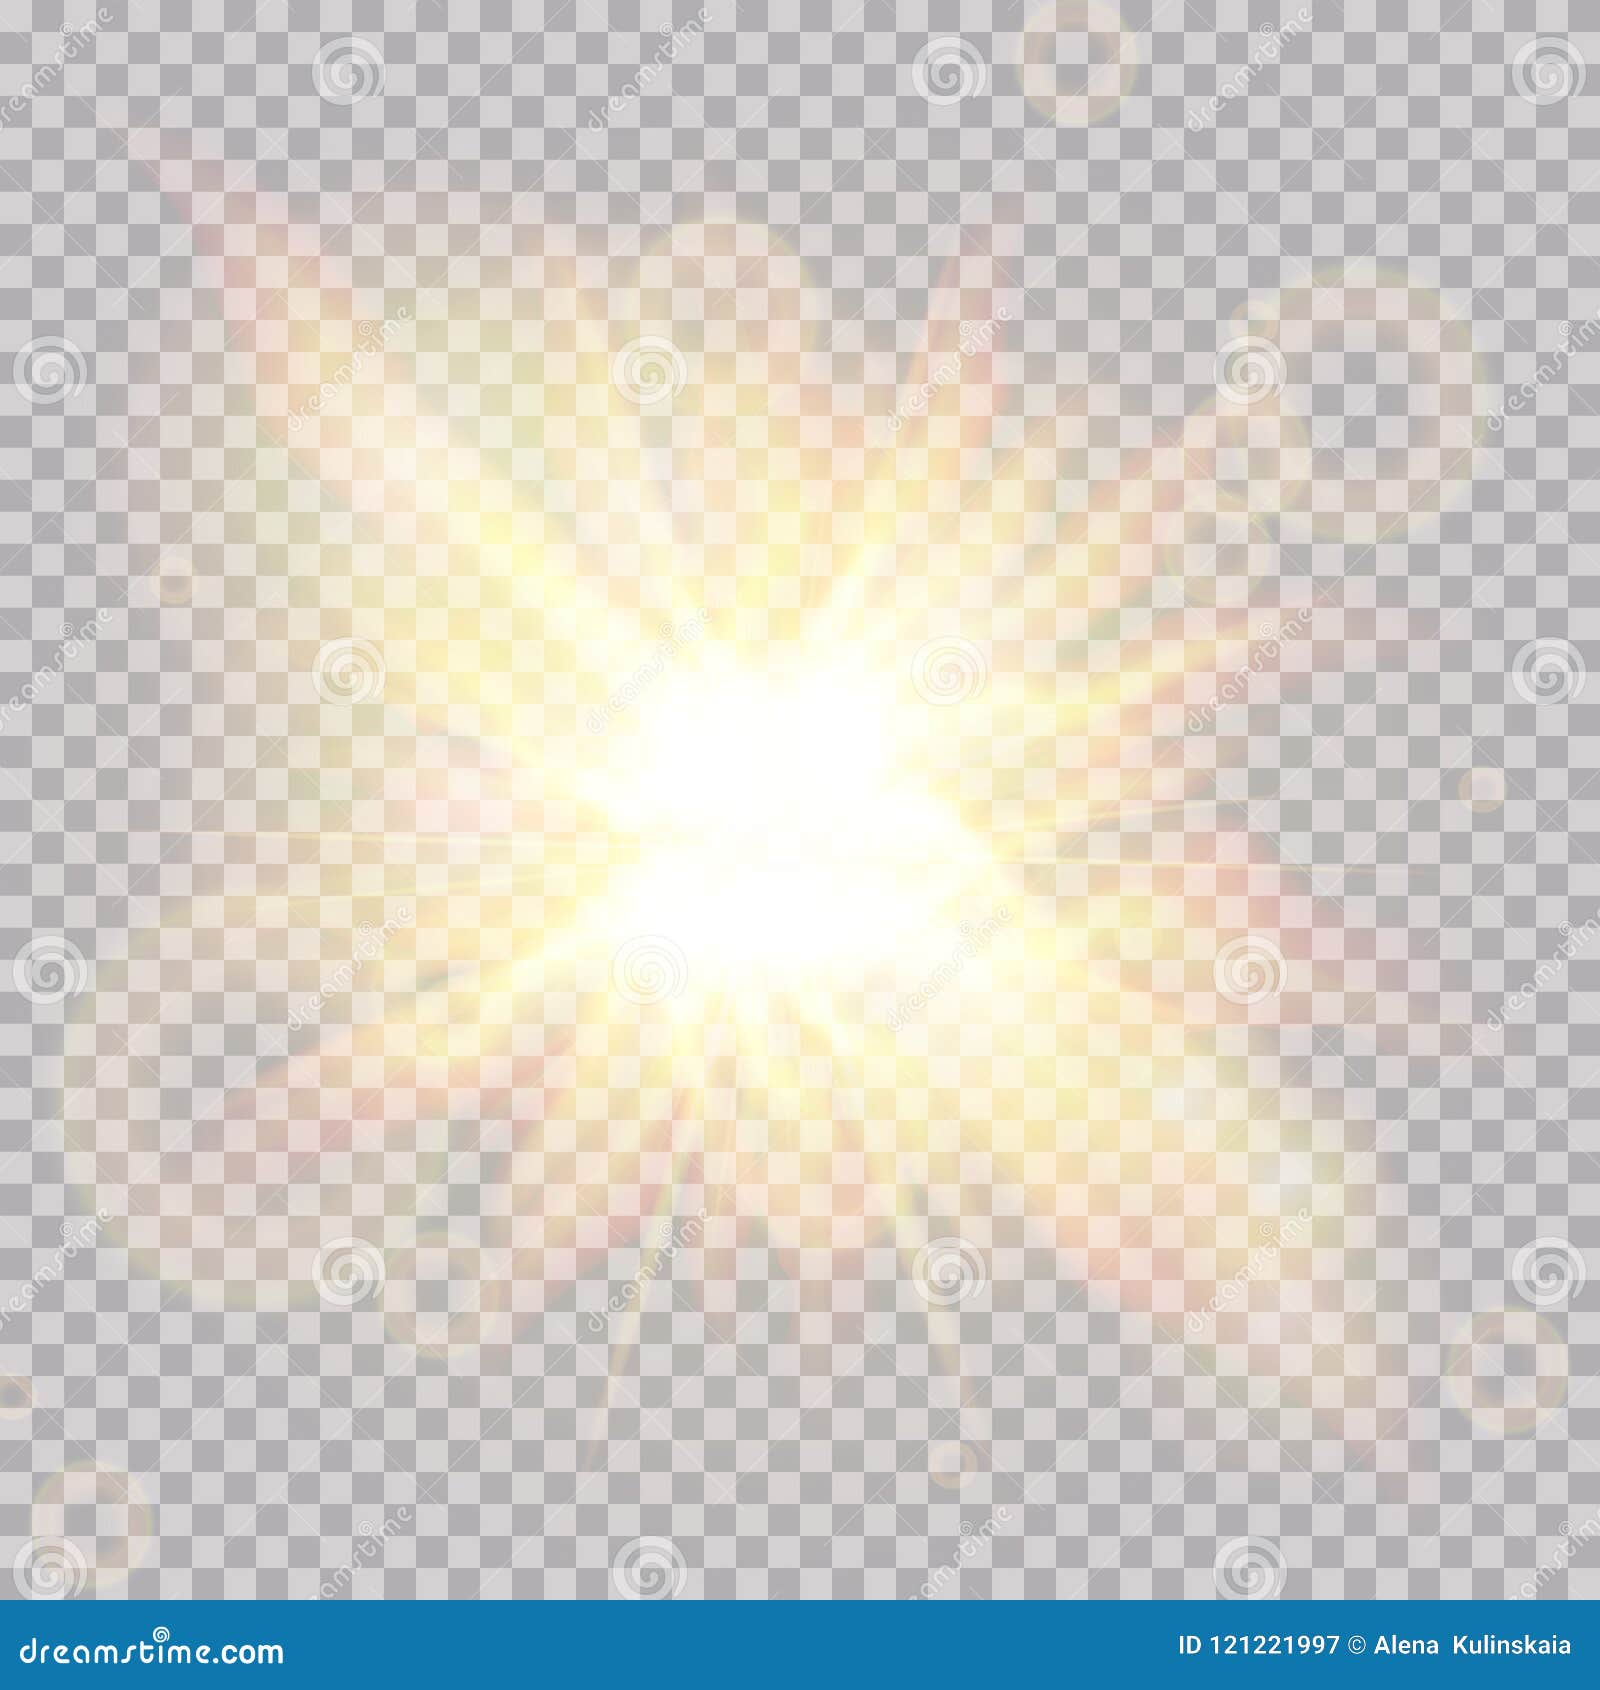 Lens Flare Light Effect. Sun Rays with Beams Isolated on Transparent  Background. Vector Illustration Stock Vector - Illustration of space, rays:  121221997